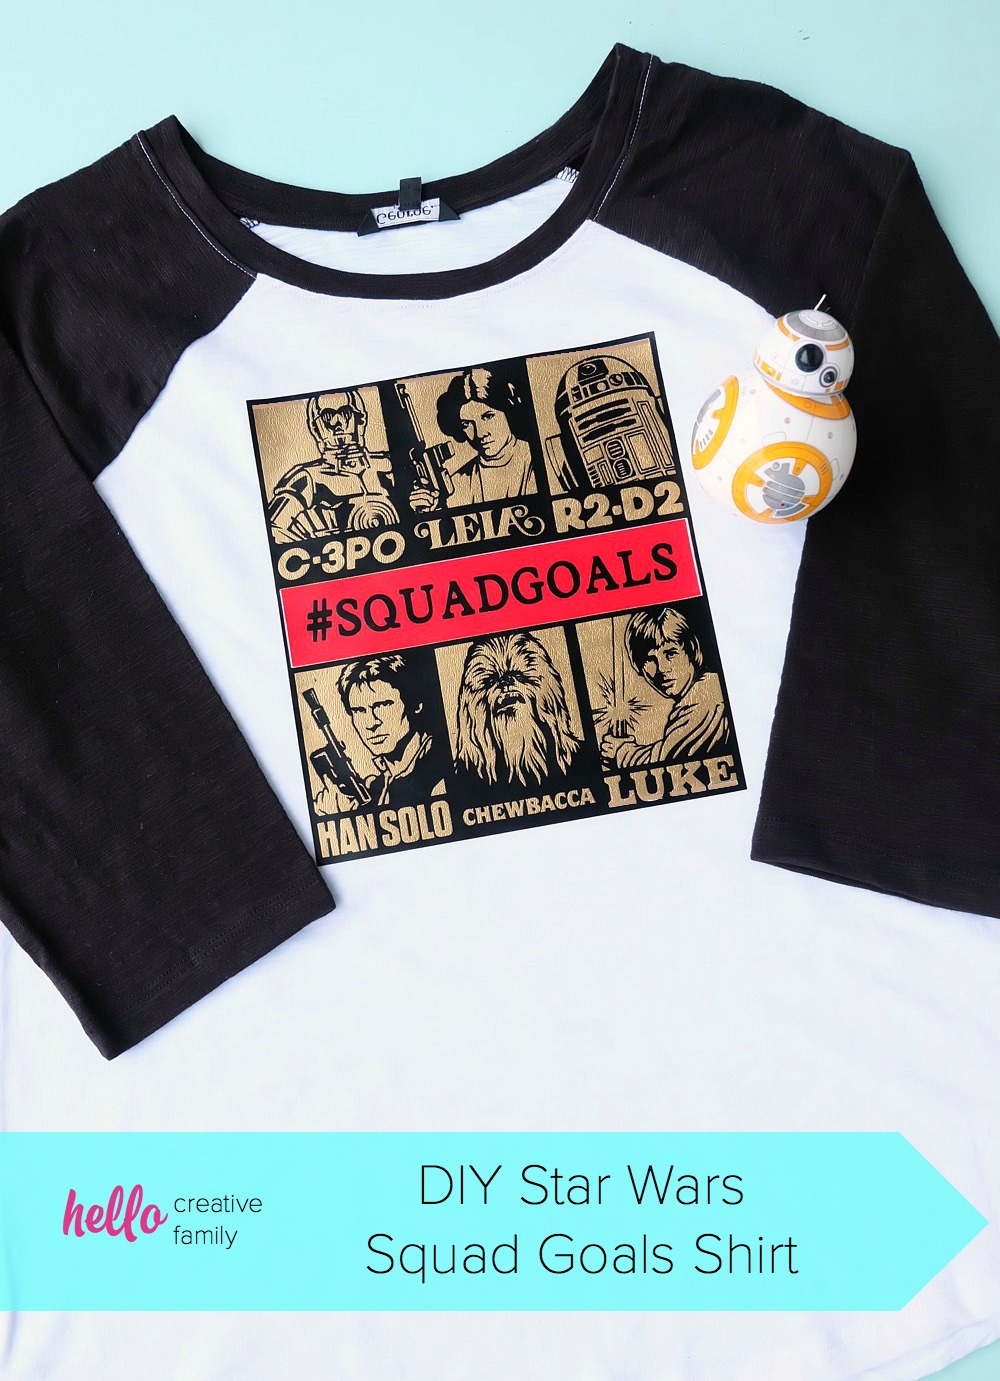 Looking for a great handmade gift idea for a Star Wars fan? This DIY Star Wars Squad Goals shirt design made on the Cricut Maker or Cricut Explore fits the bill. Let the world know you are down with C-3PO, Princess Leia, R2-D2, Han Solo, Chewbacca and Luke Skywalker! A fun and easy project! #CricutMade #CricutStarWars #Cricut #StarWars #MayTheForthBeWithYou